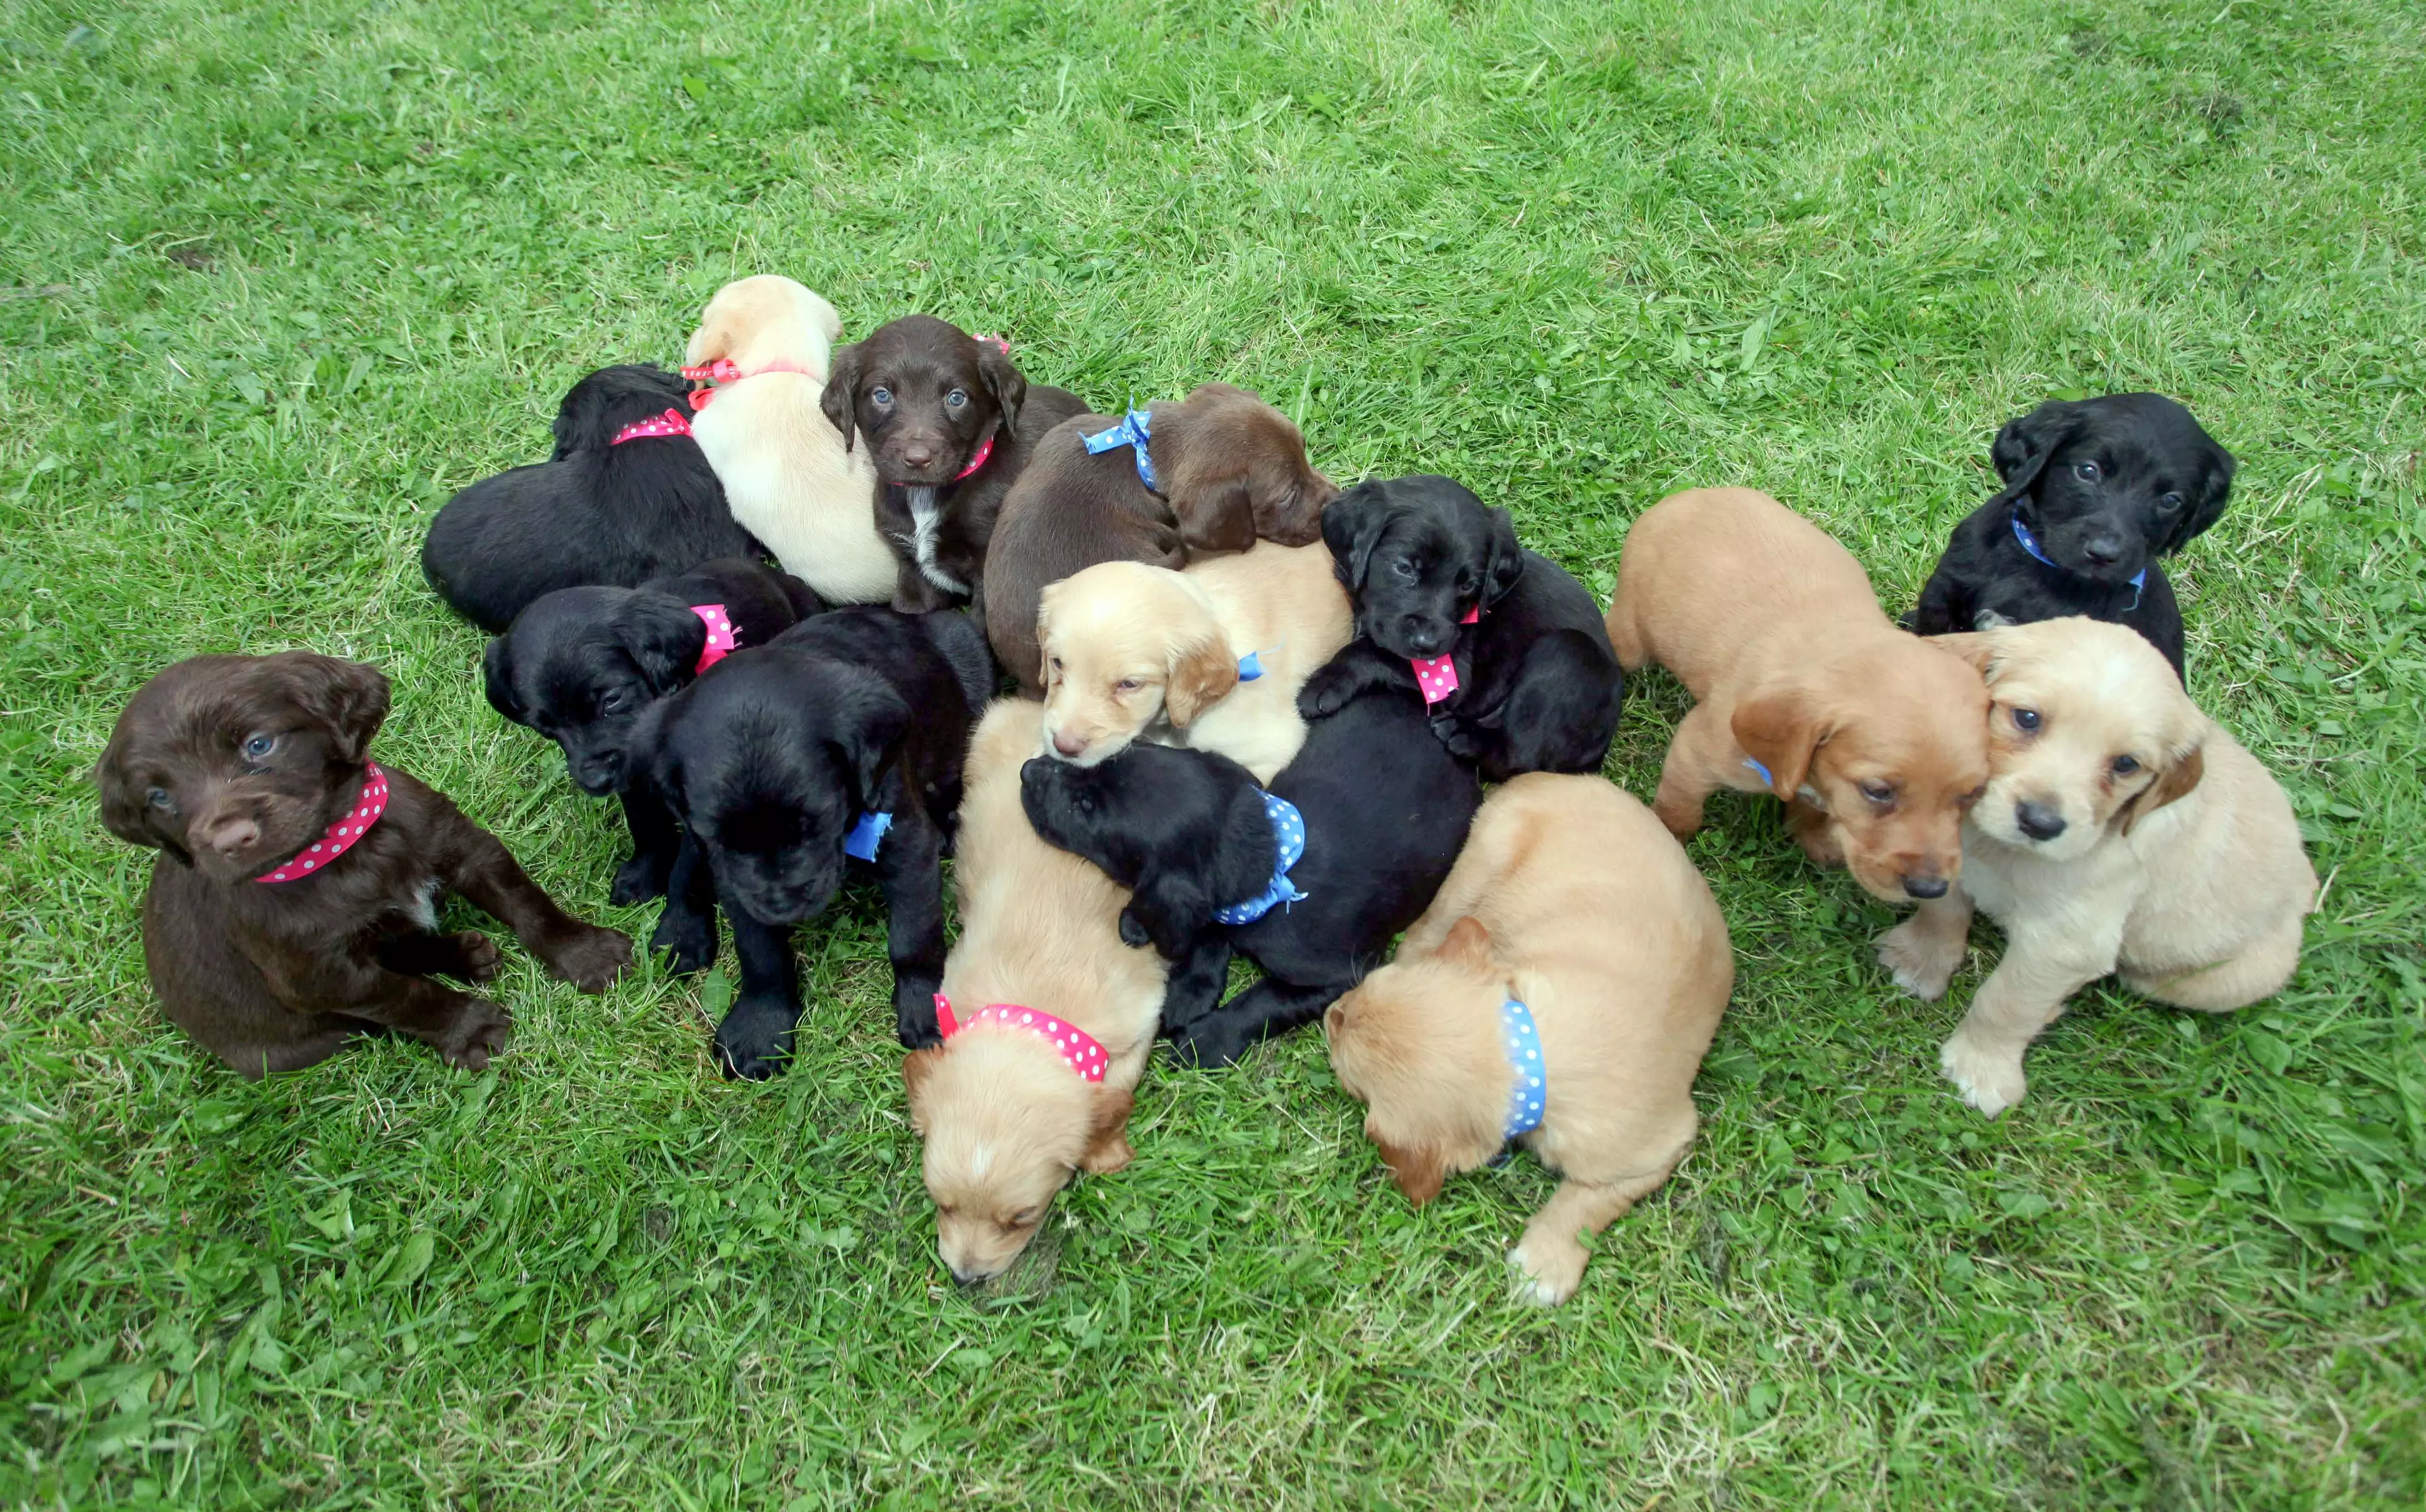 It's one of the largest ever litters (